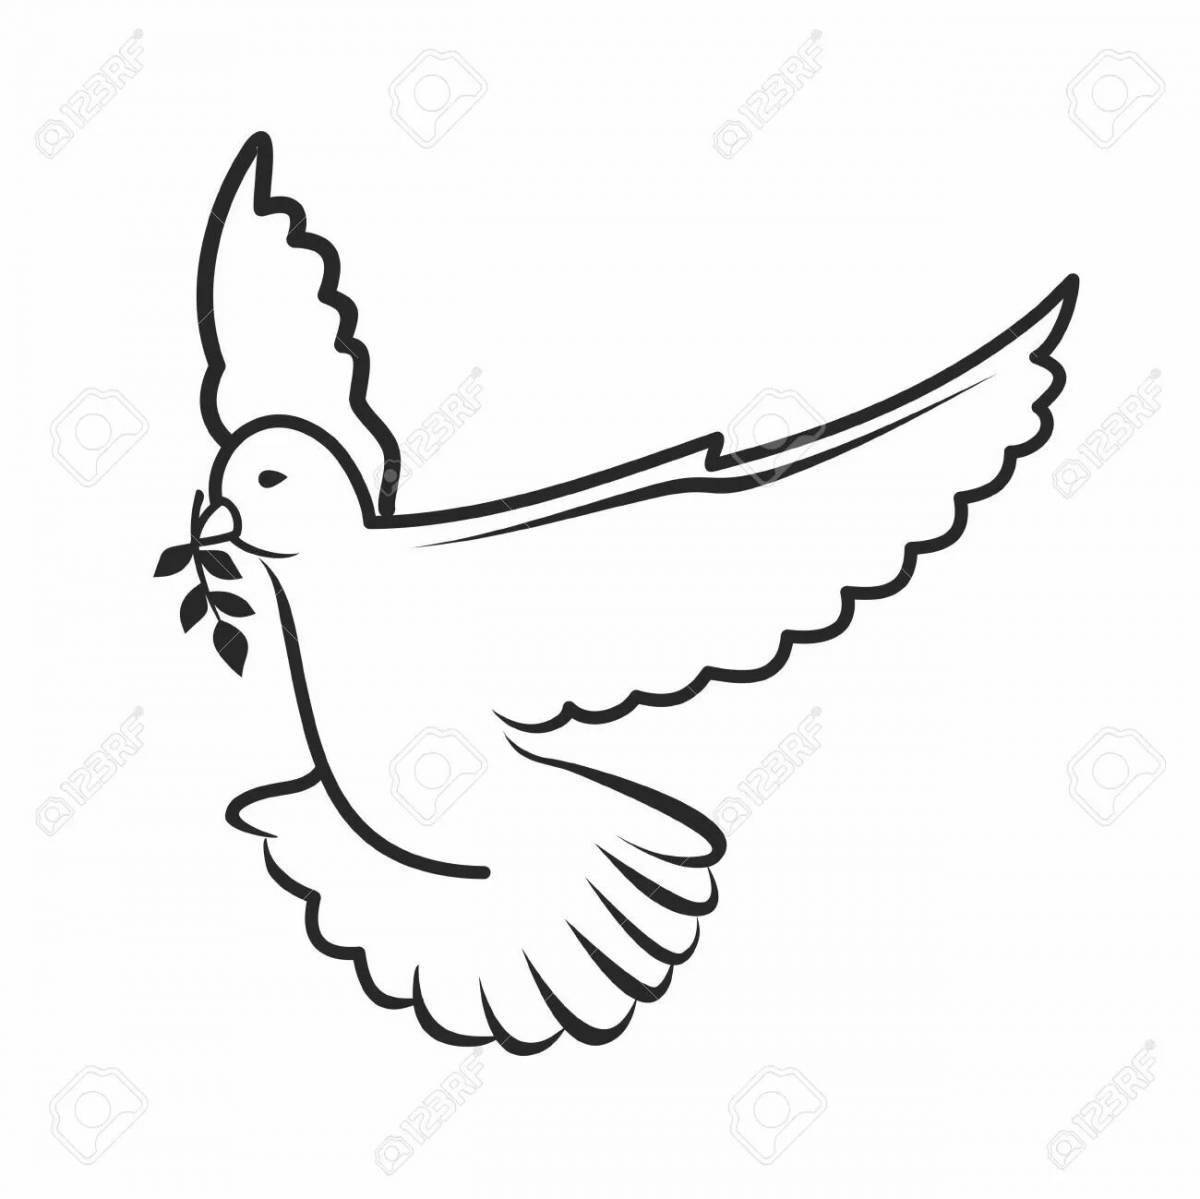 Coloring page elegant flying dove